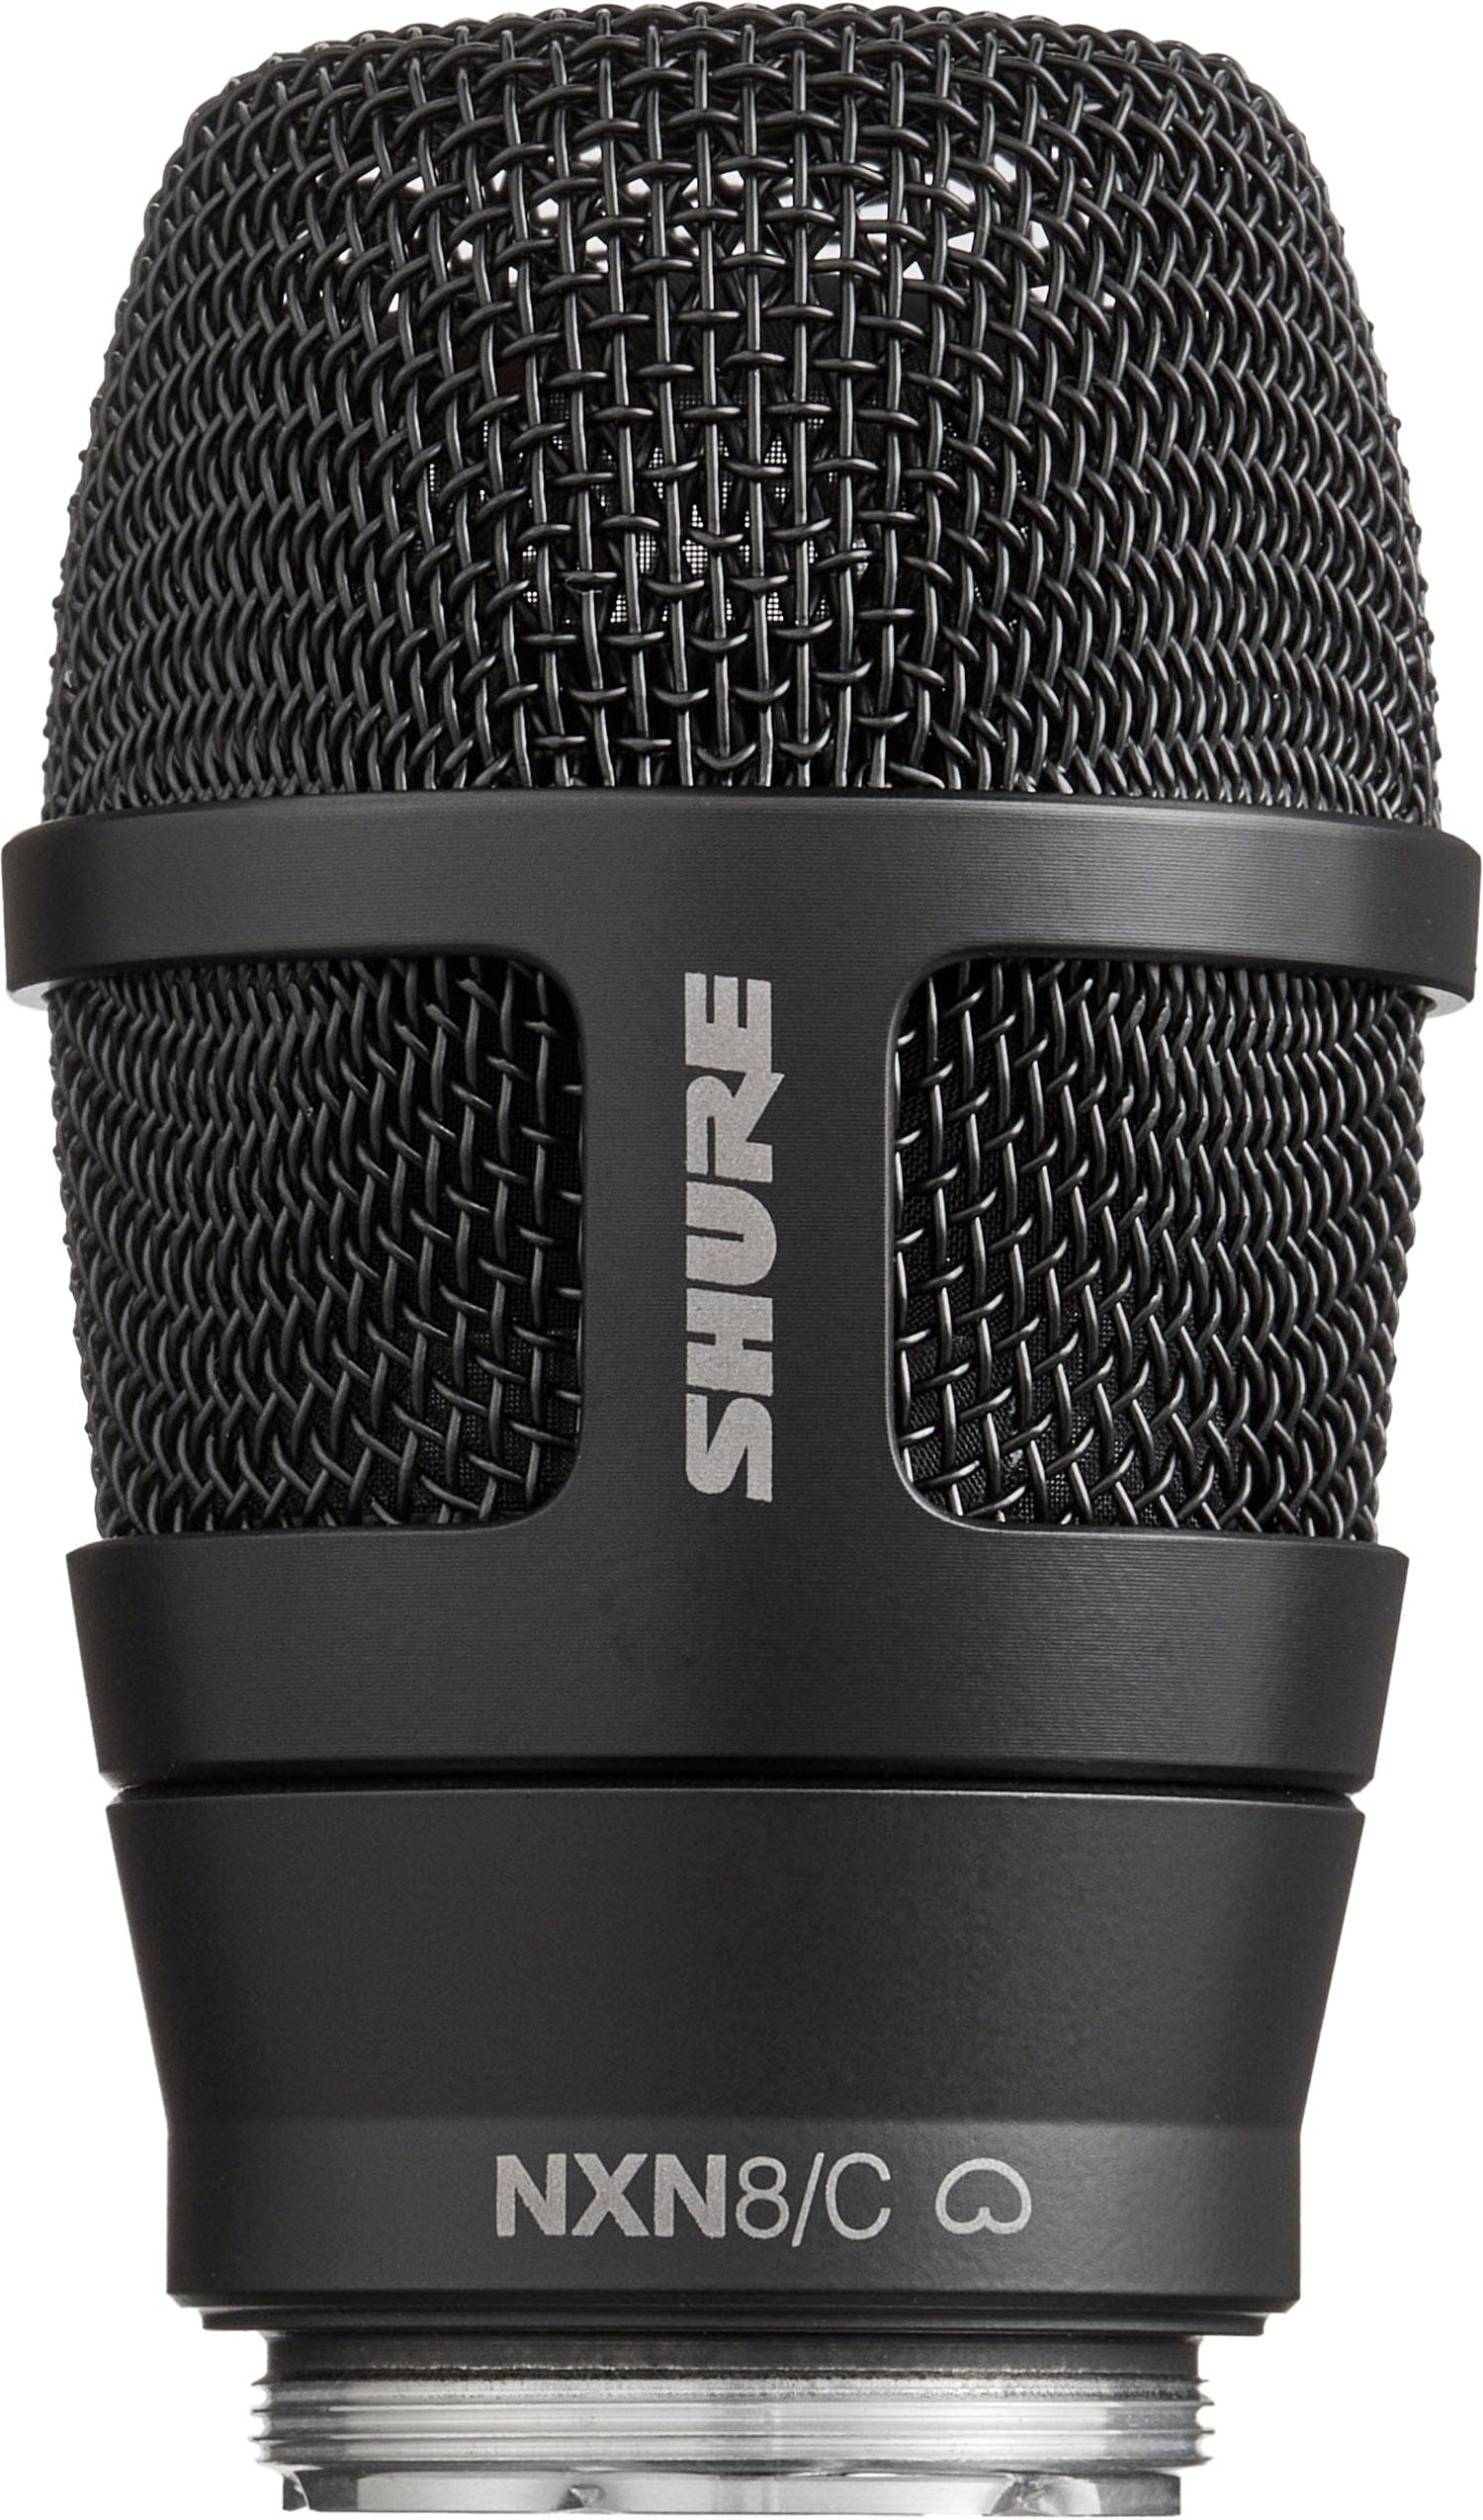 Shure RPW200 Nexadyne 8/C Cardioid Dynamic Wireless Capsule for Handheld Transmitters - Black - PSSL ProSound and Stage Lighting